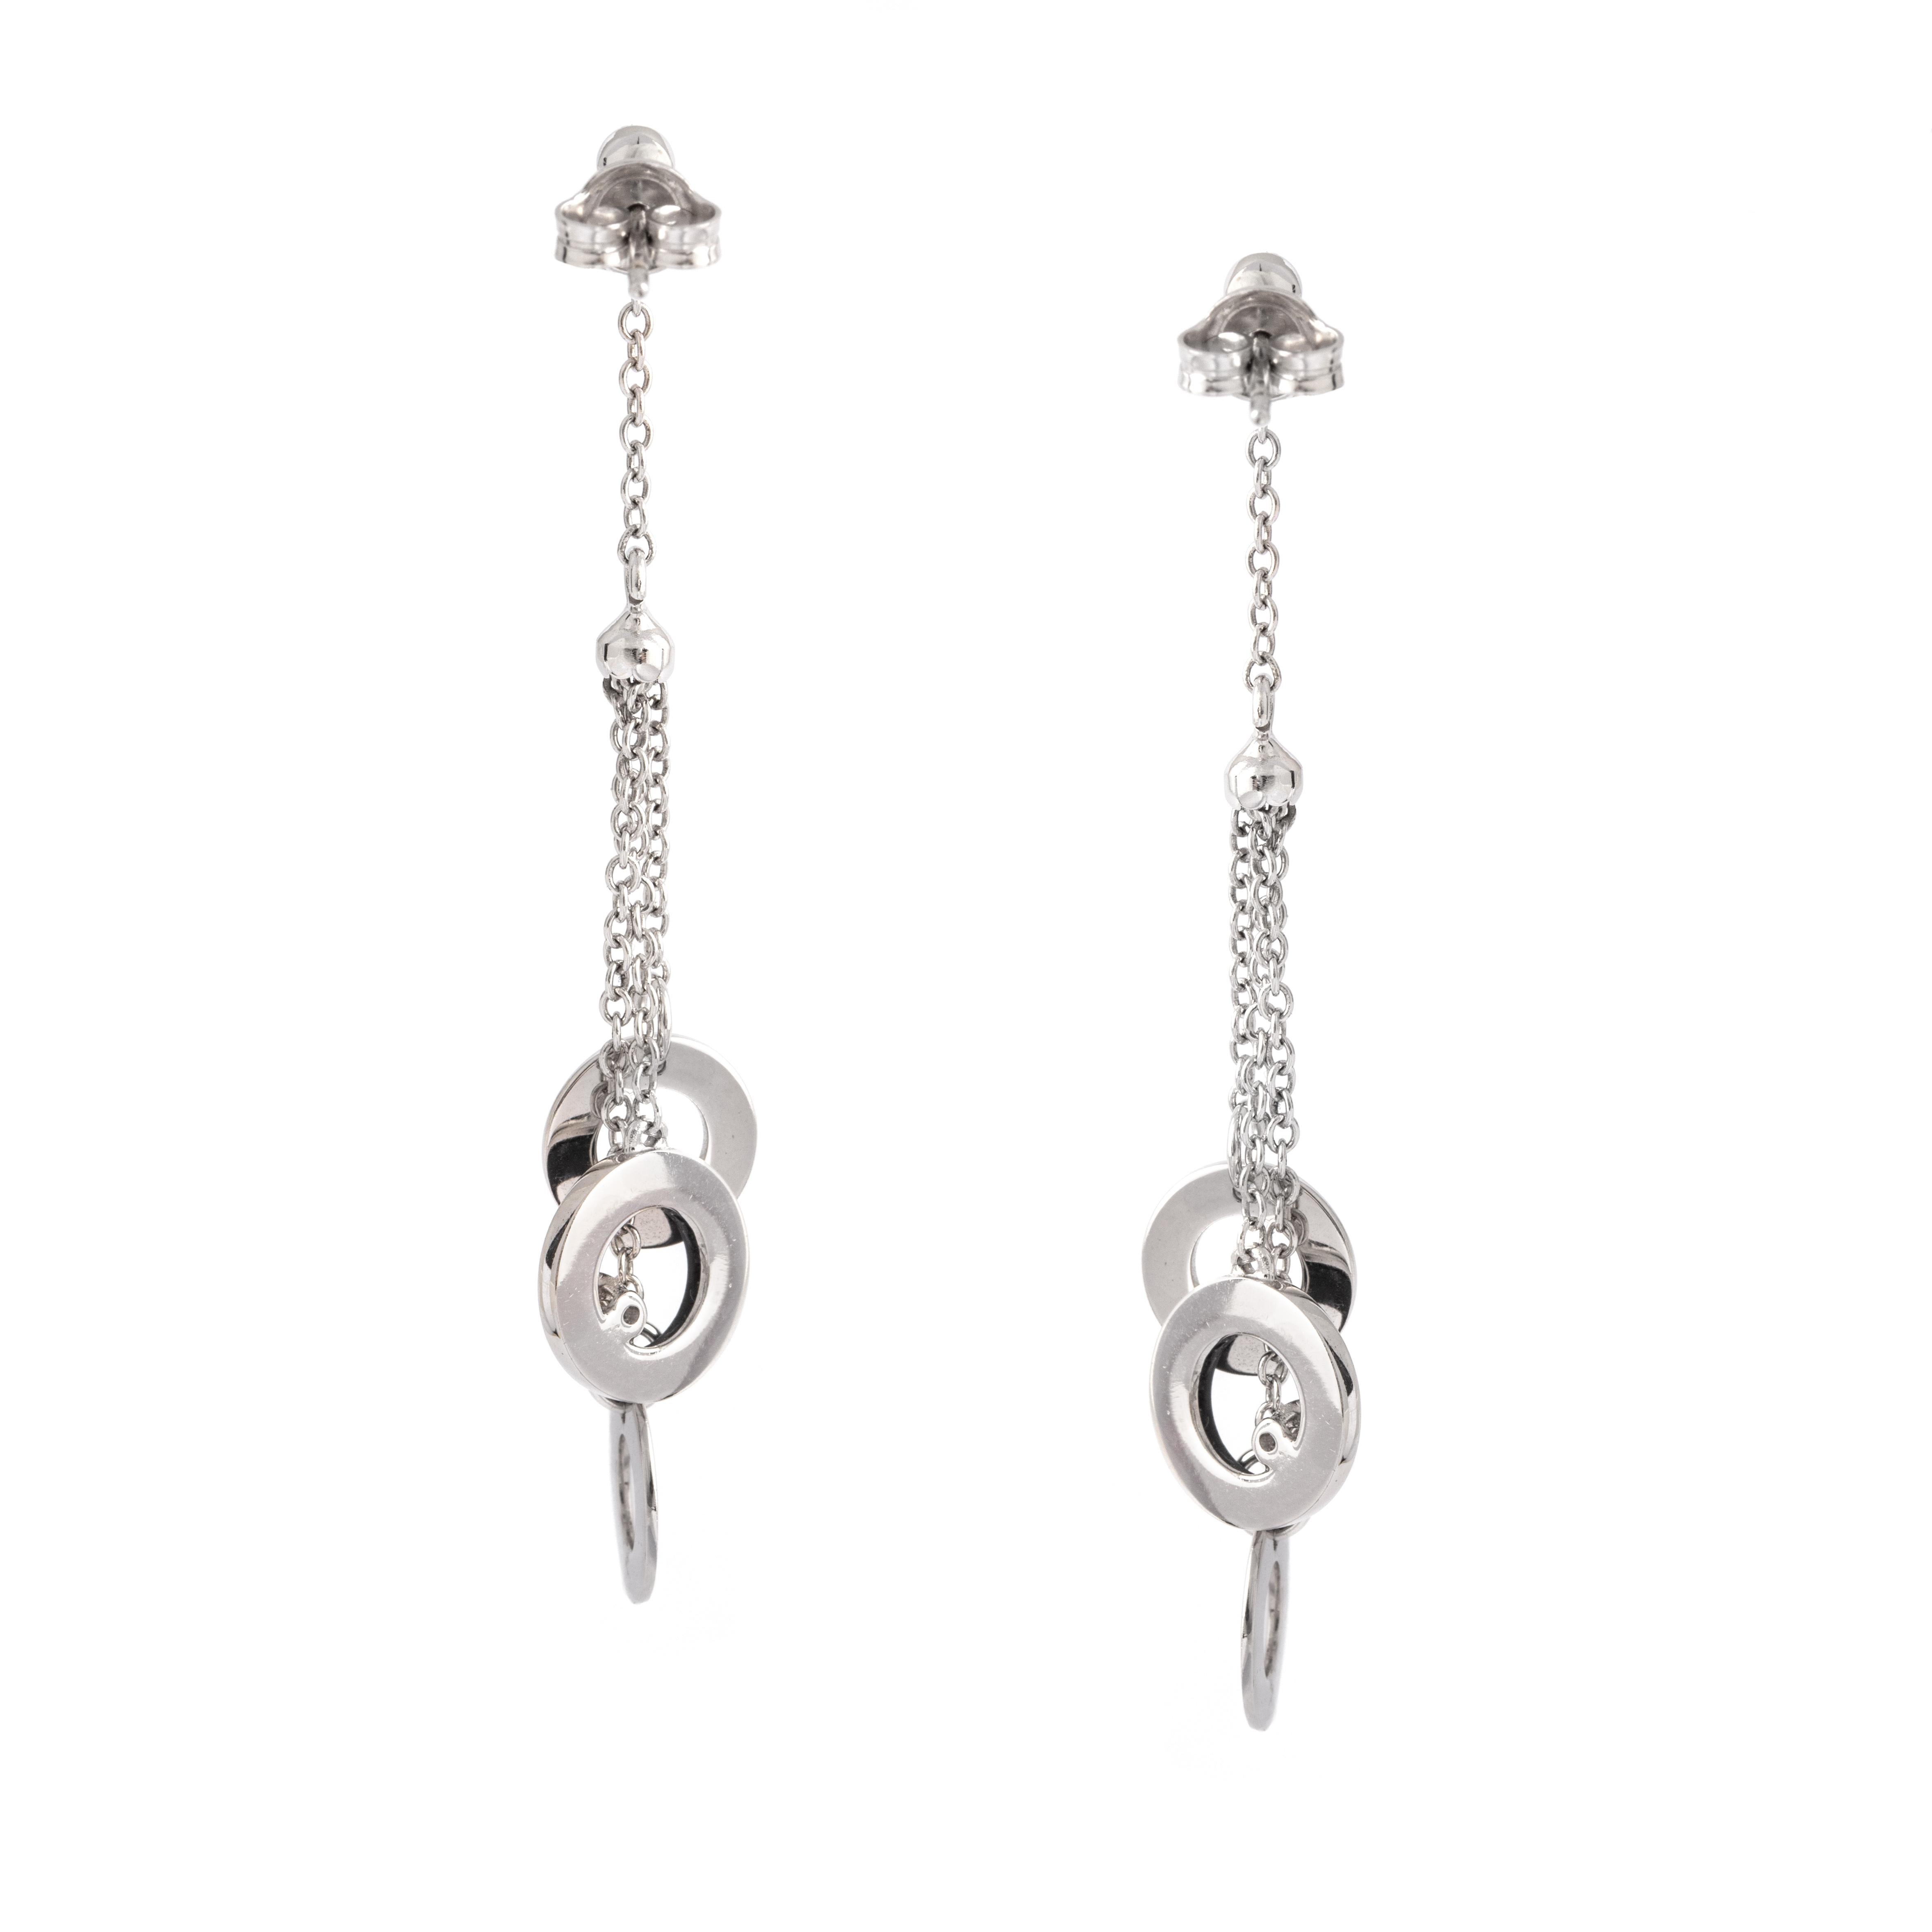 Diamond White Gold Earrings.
2 round cut diamond 0.06 carat.
Total weight: 6.44 grams.
Length: 6.20 centimeters.
Width: 0.30 centimeters up to 1.10 centimeters.
